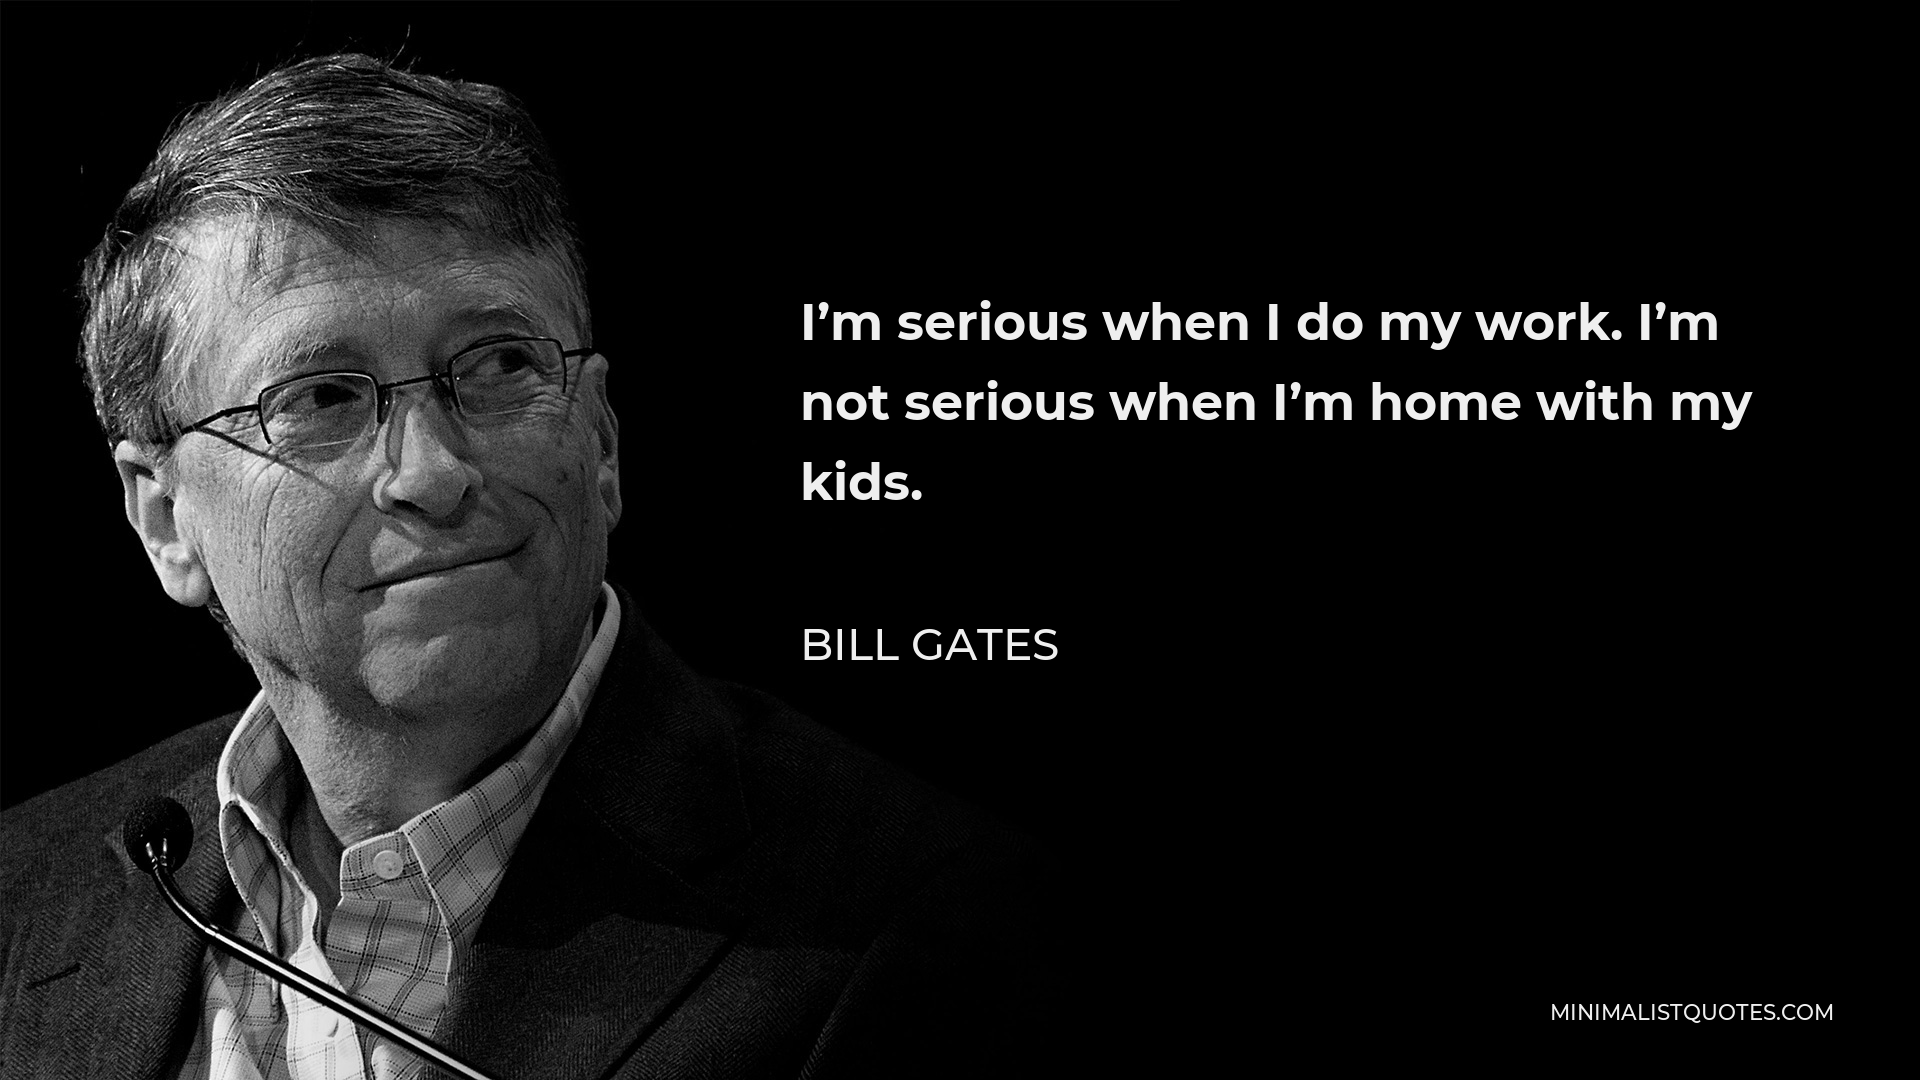 Bill Gates Quote - I’m serious when I do my work. I’m not serious when I’m home with my kids.